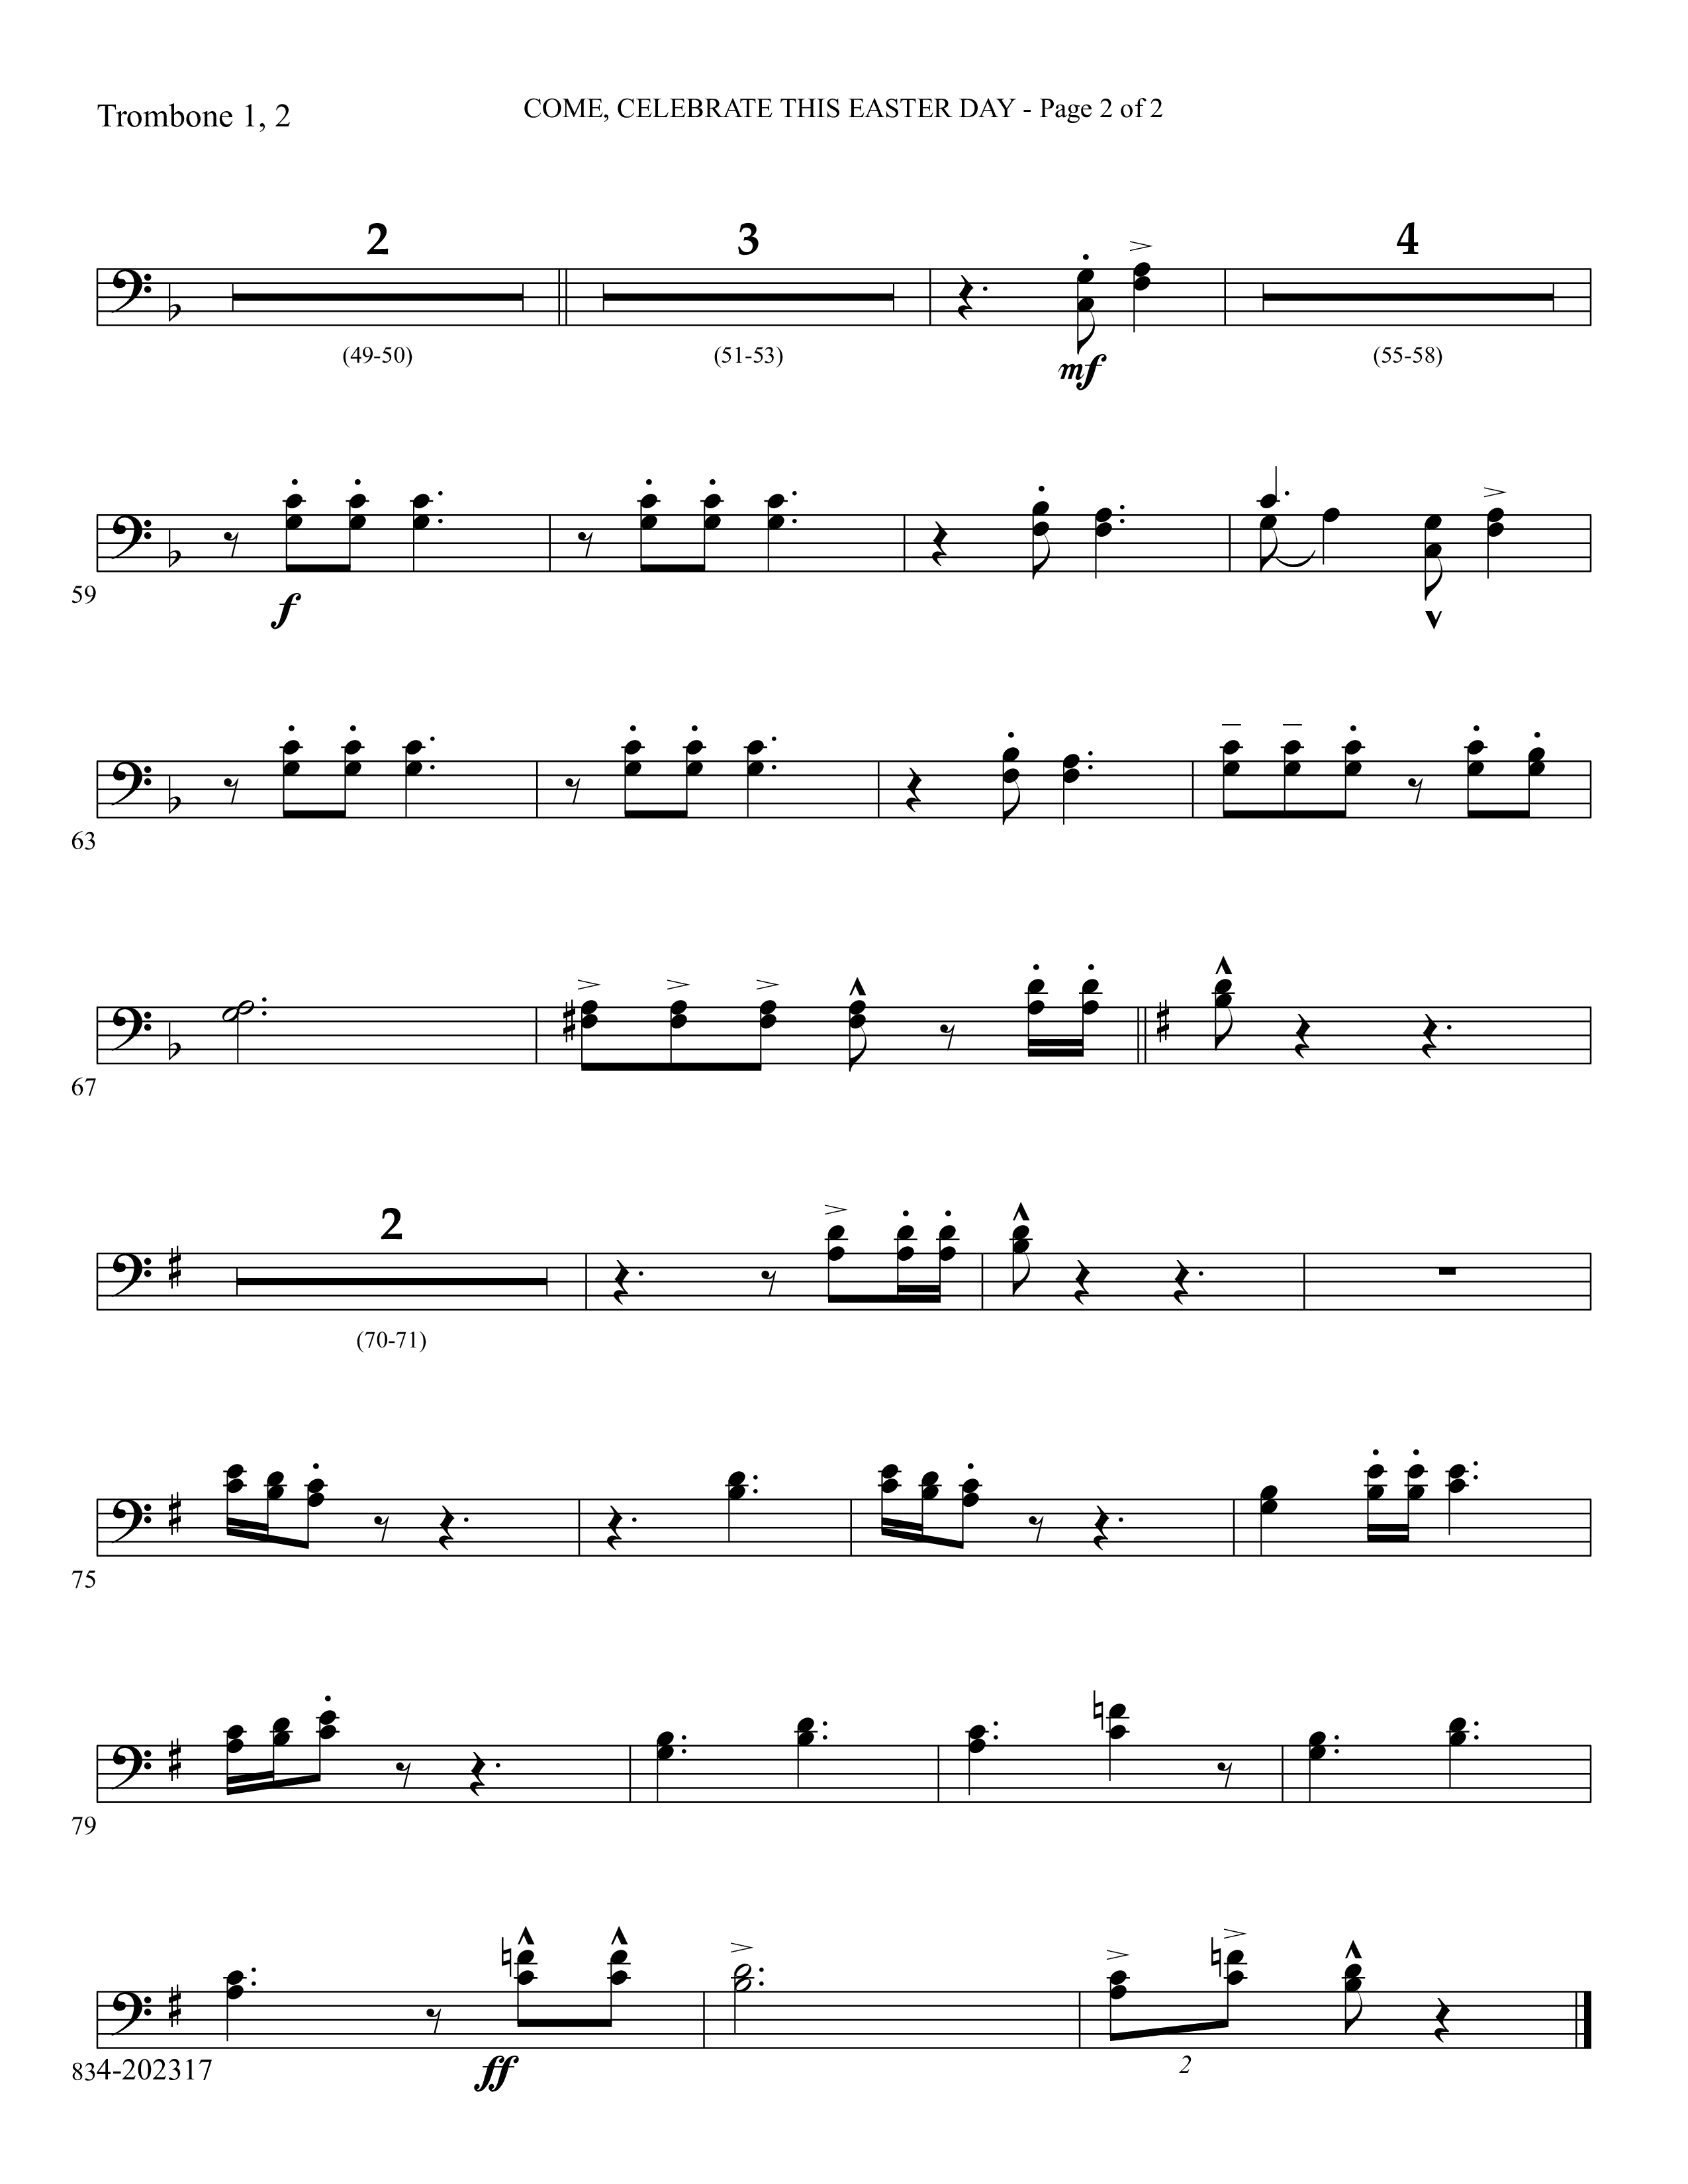 Come Celebrate This Easter Day (Choral Anthem SATB) Trombone 1/2 (Foster Music Group / Arr. Marty Parks)